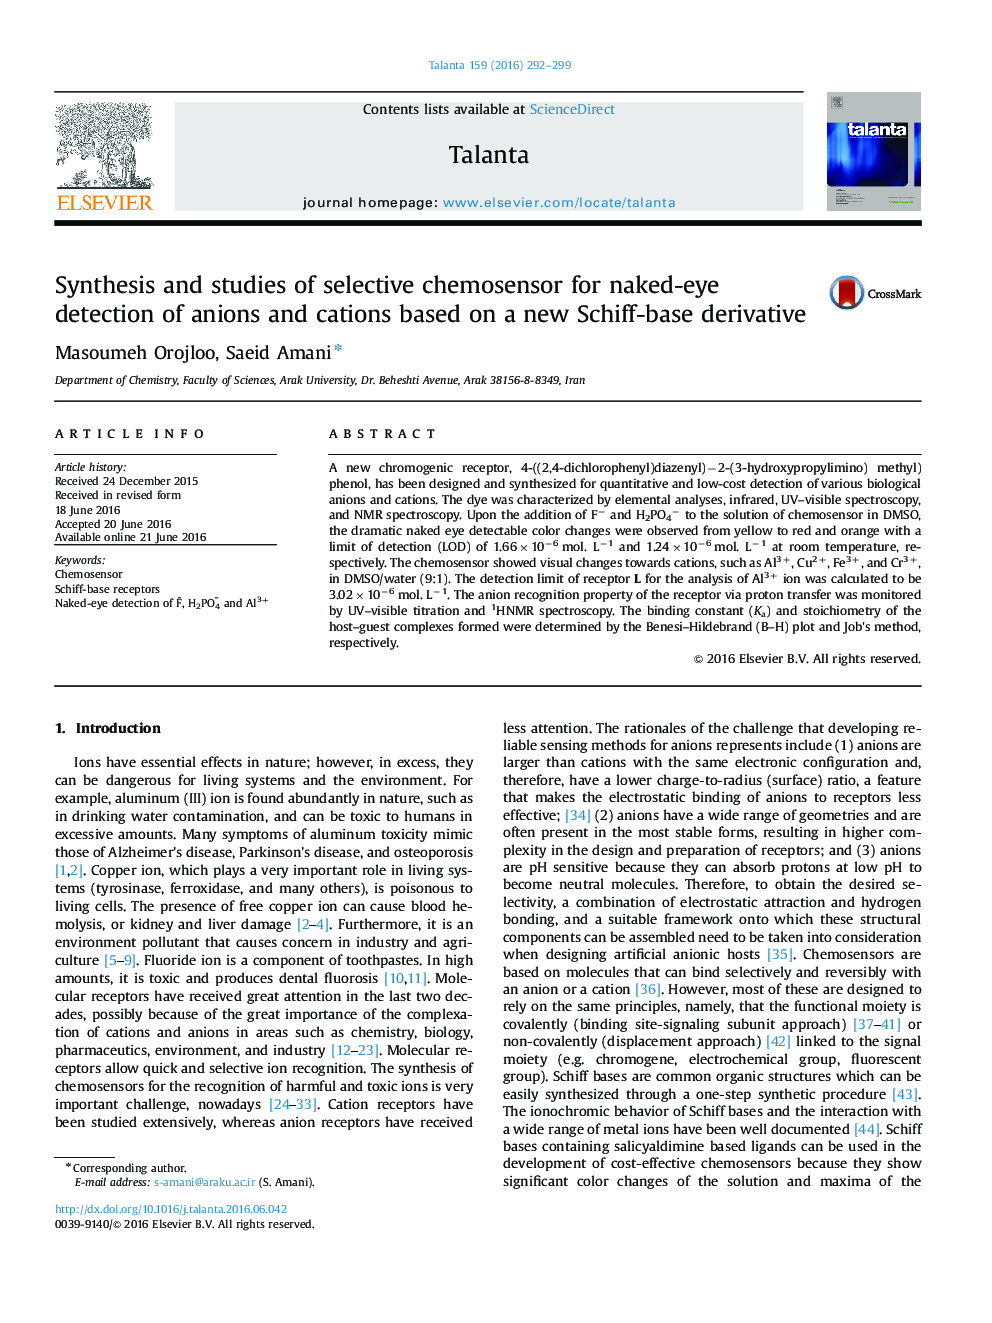 Synthesis and studies of selective chemosensor for naked-eye detection of anions and cations based on a new Schiff-base derivative